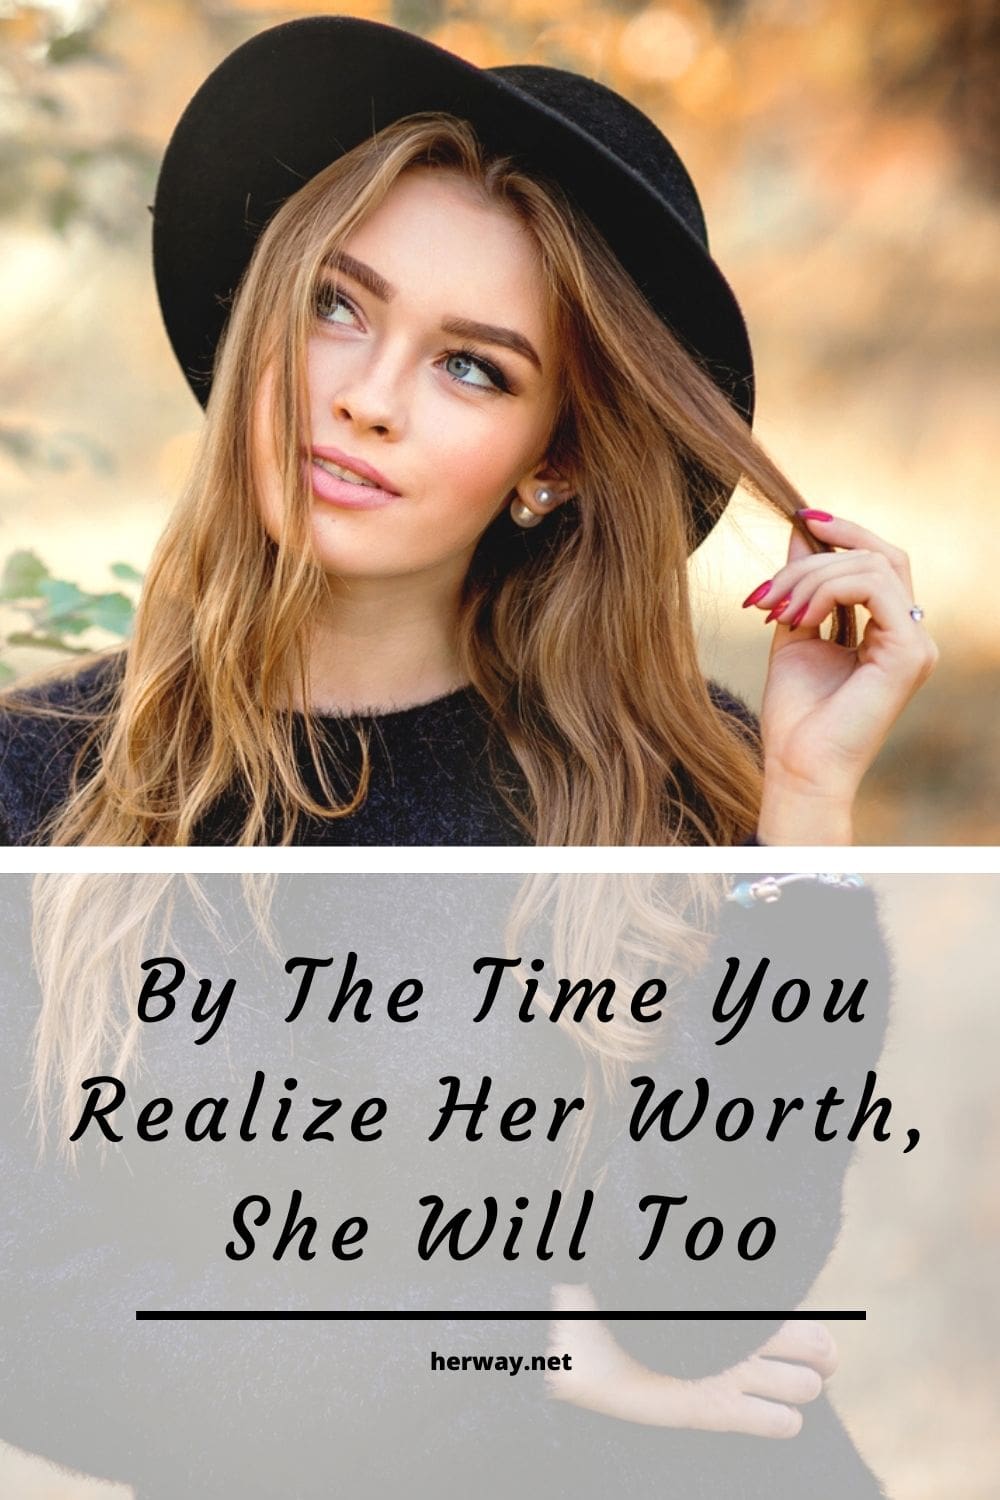 By The Time You Realize Her Worth, She Will Too